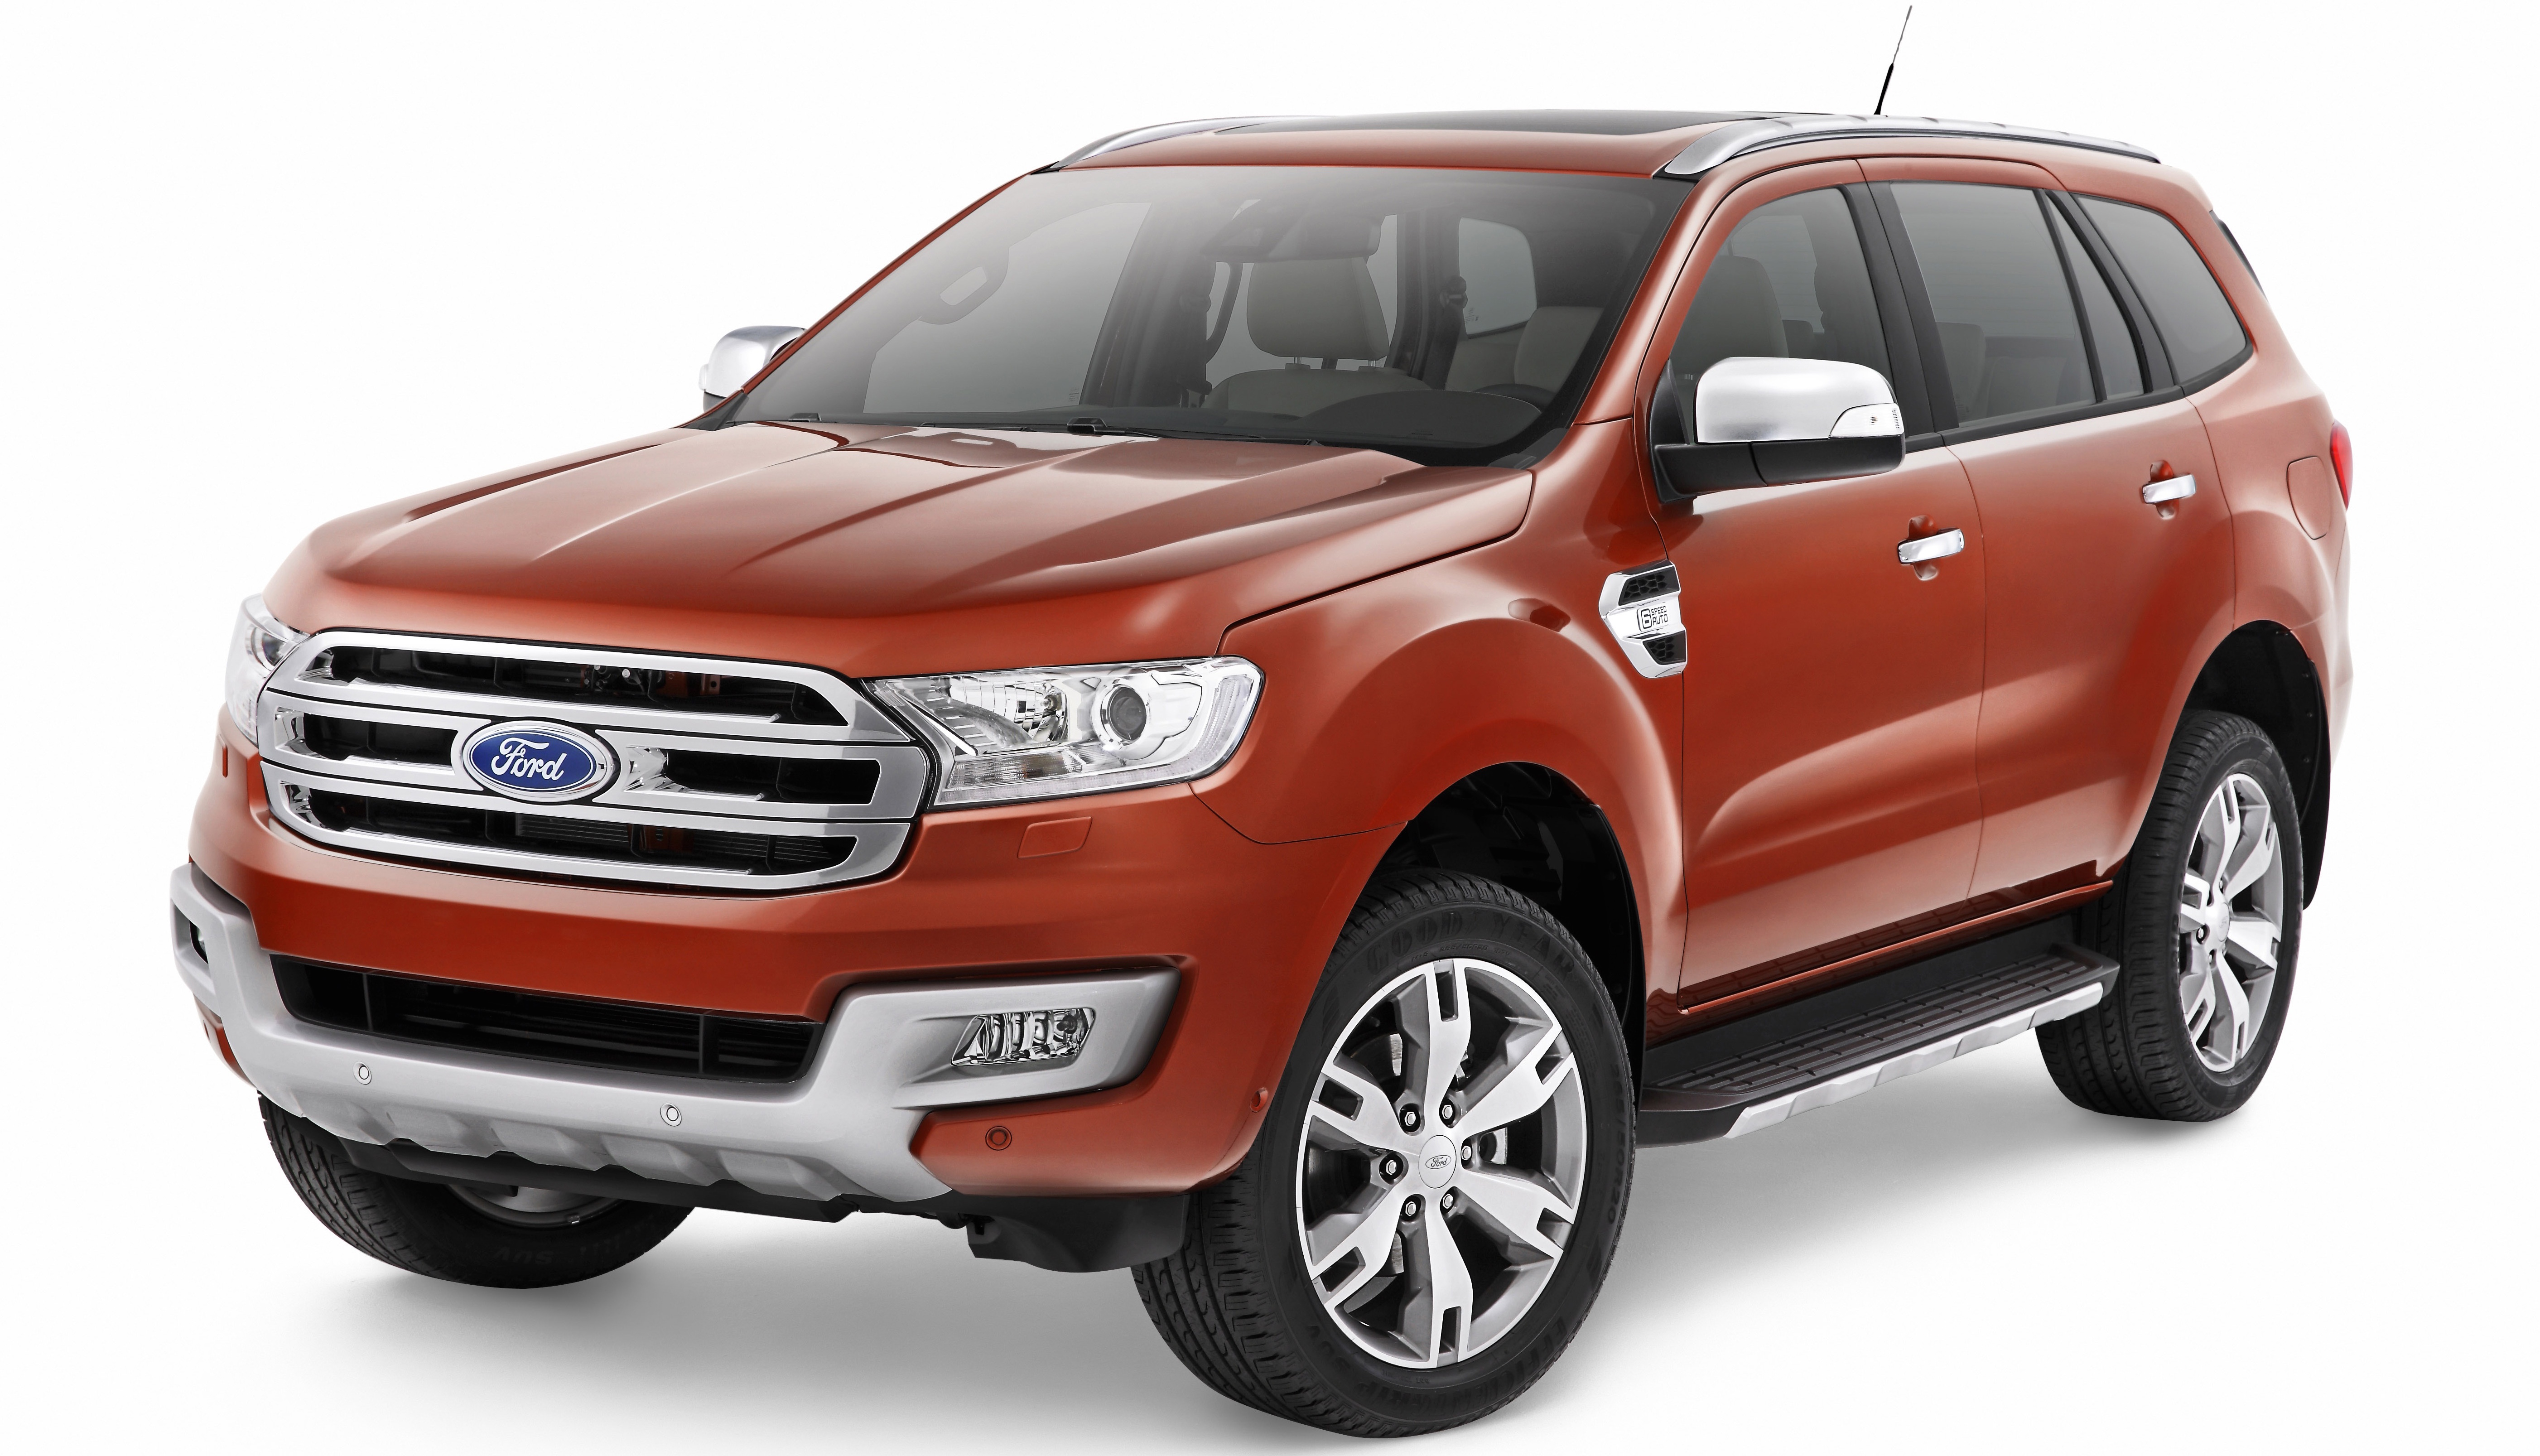 Amazing Ford Everest Pictures & Backgrounds